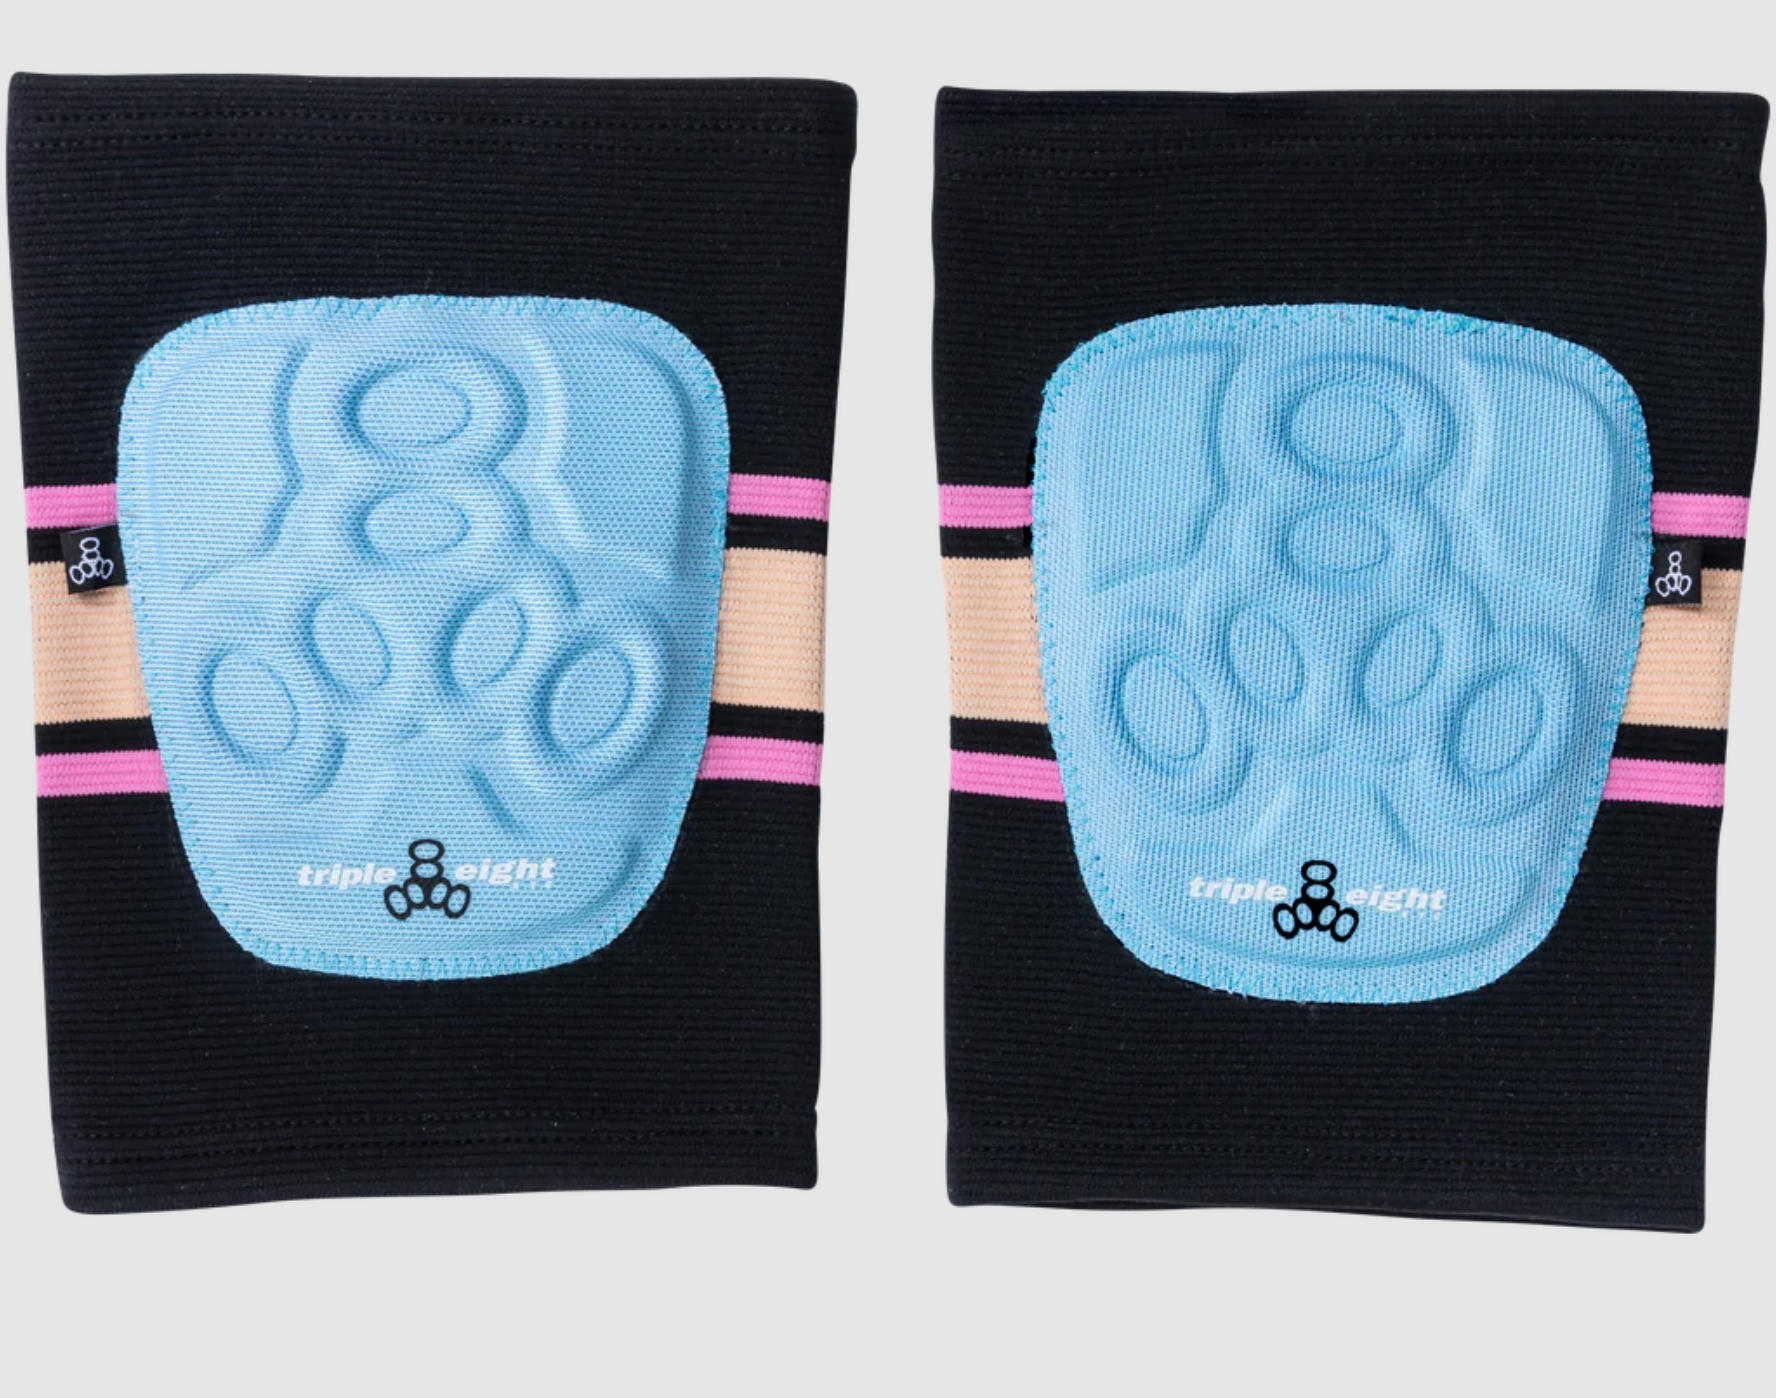 Triple 8 Covert knee pads (All colors!)